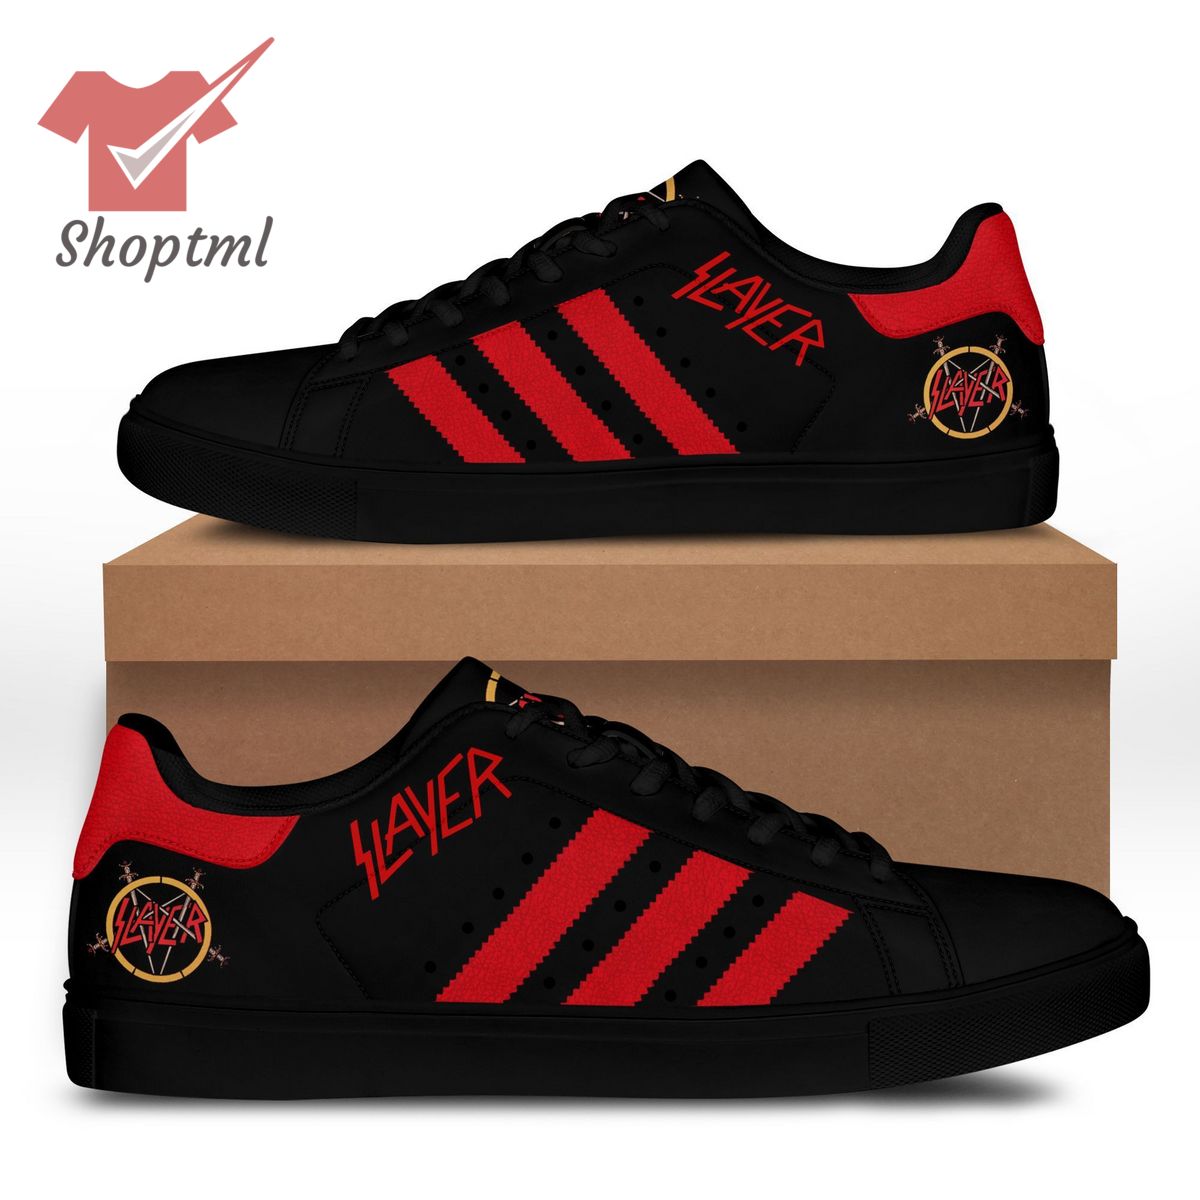 Slayer Black Red stan smith shoes